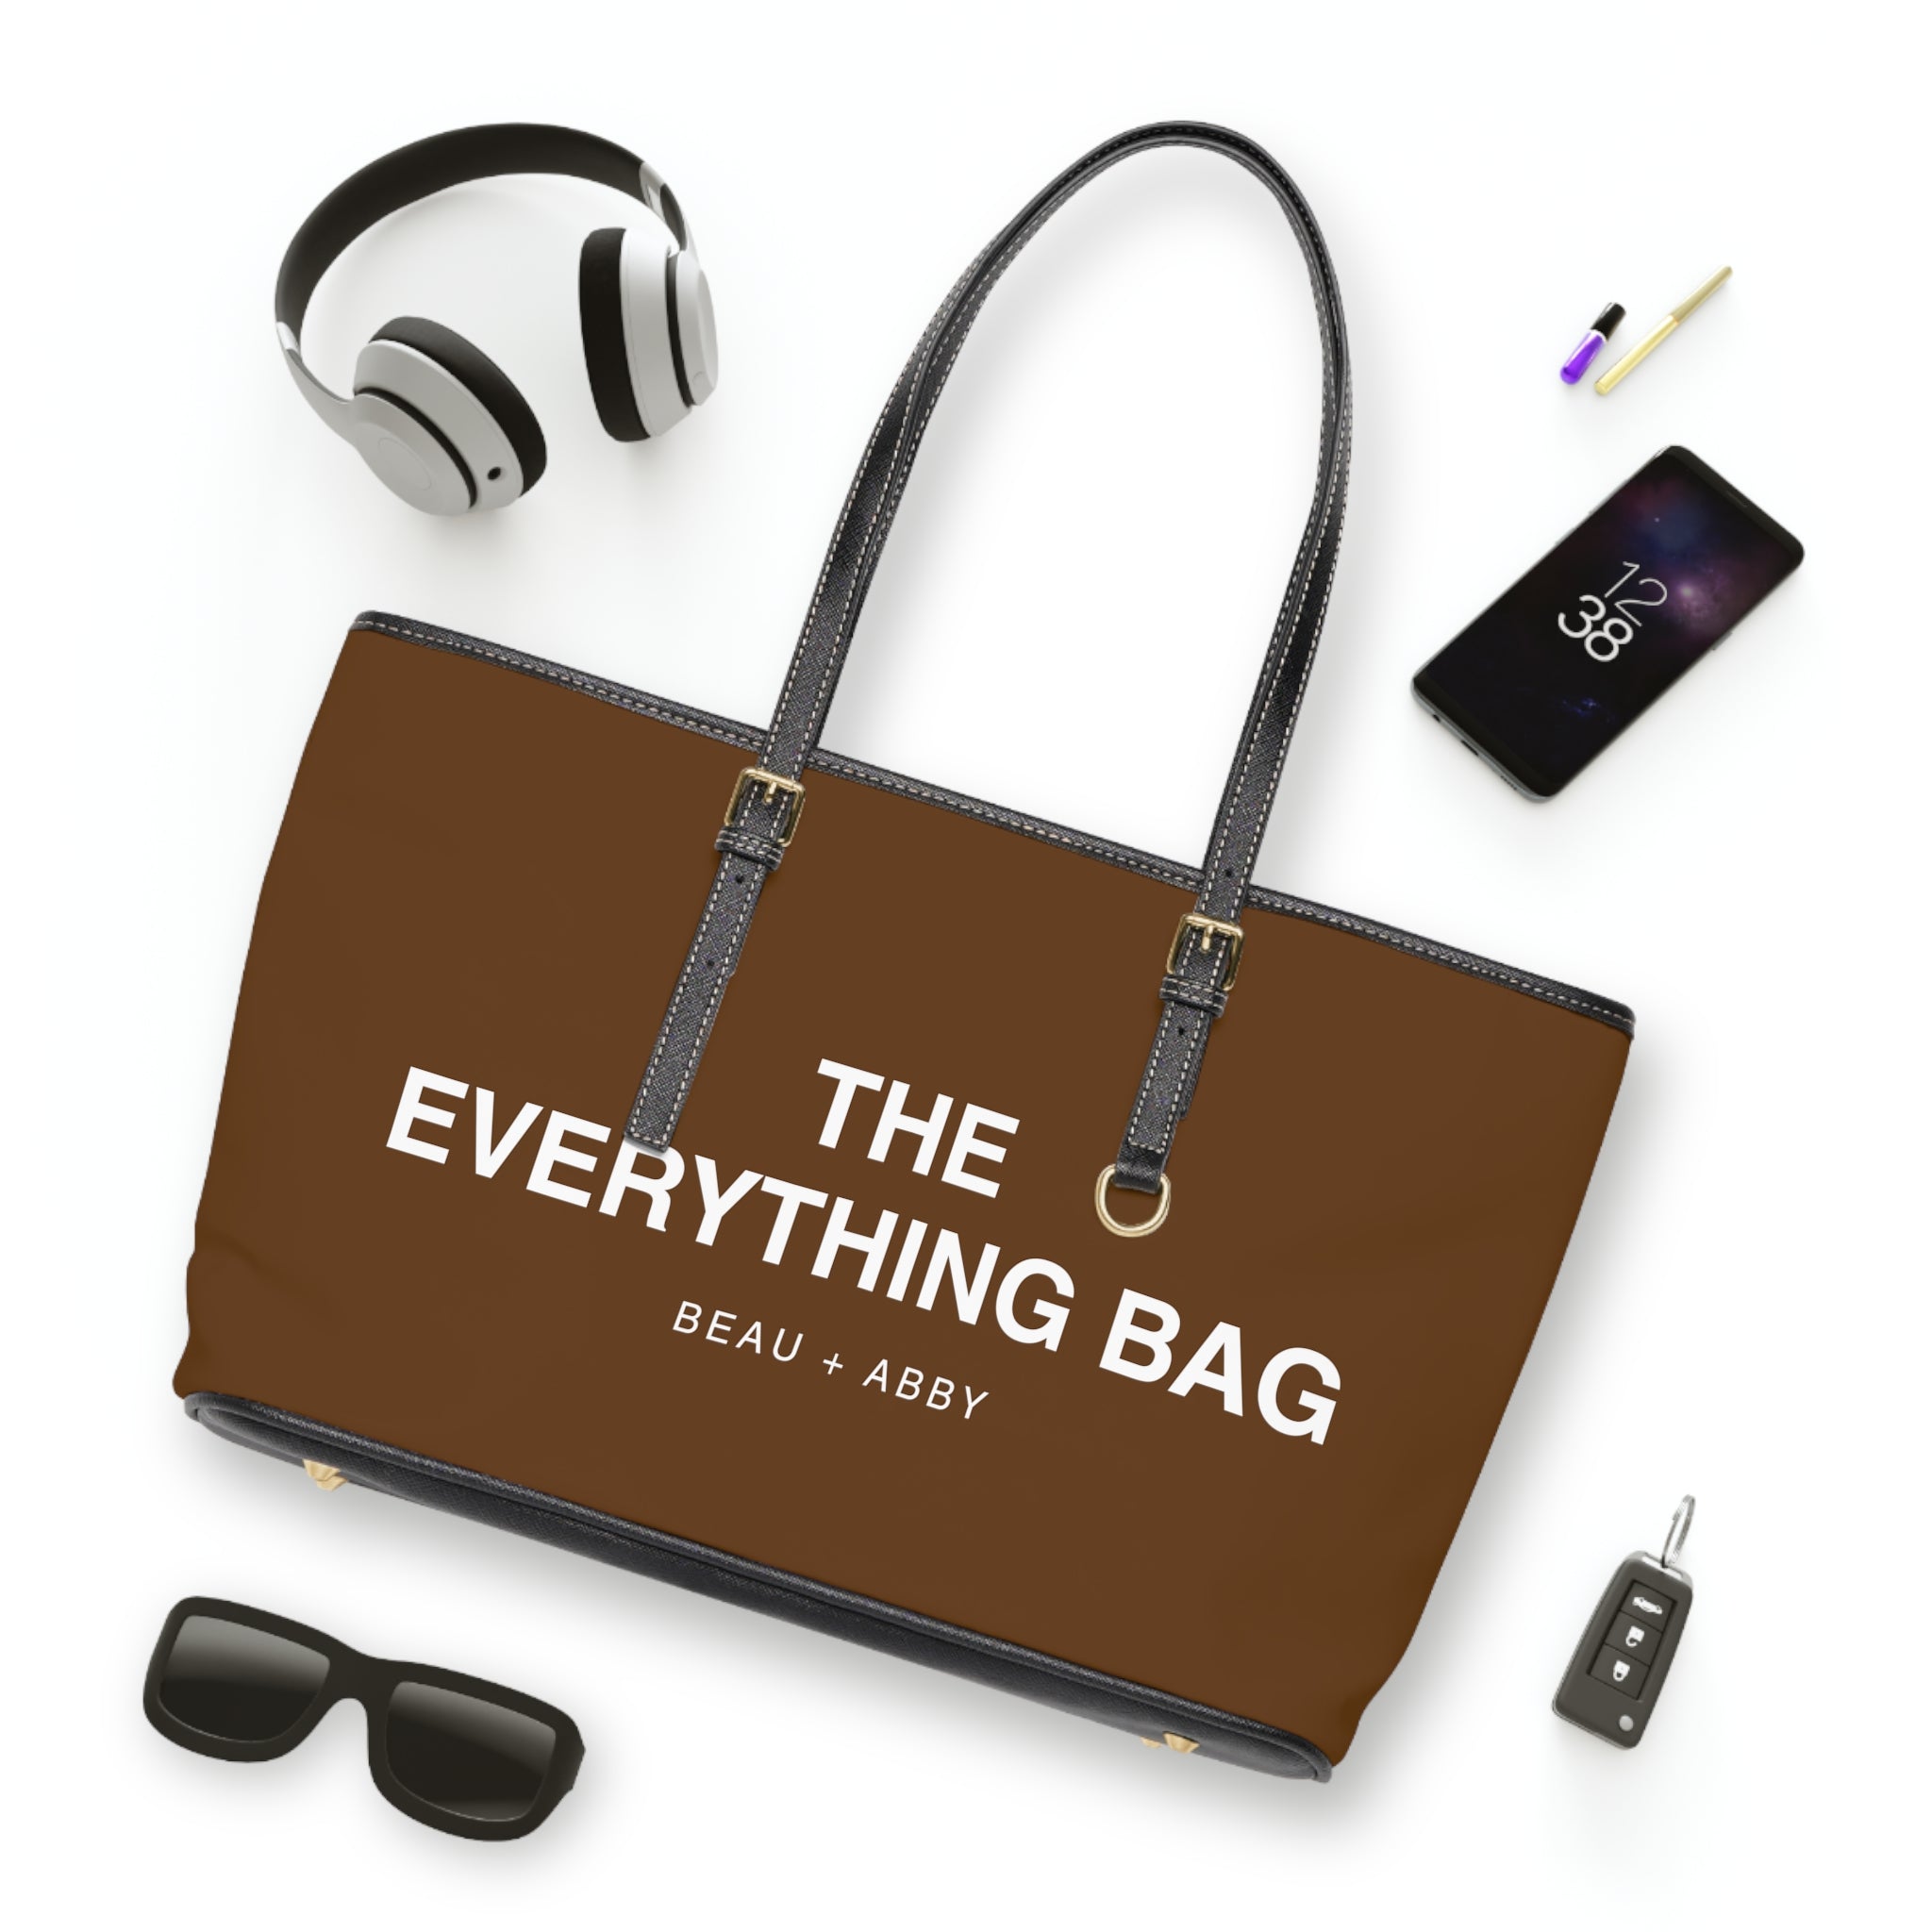 Casual Wear Accessories "Everything Bag" PU Leather Shoulder Bag in Dark Brown, Tote Bag, Weekend Tote, Gift For Her